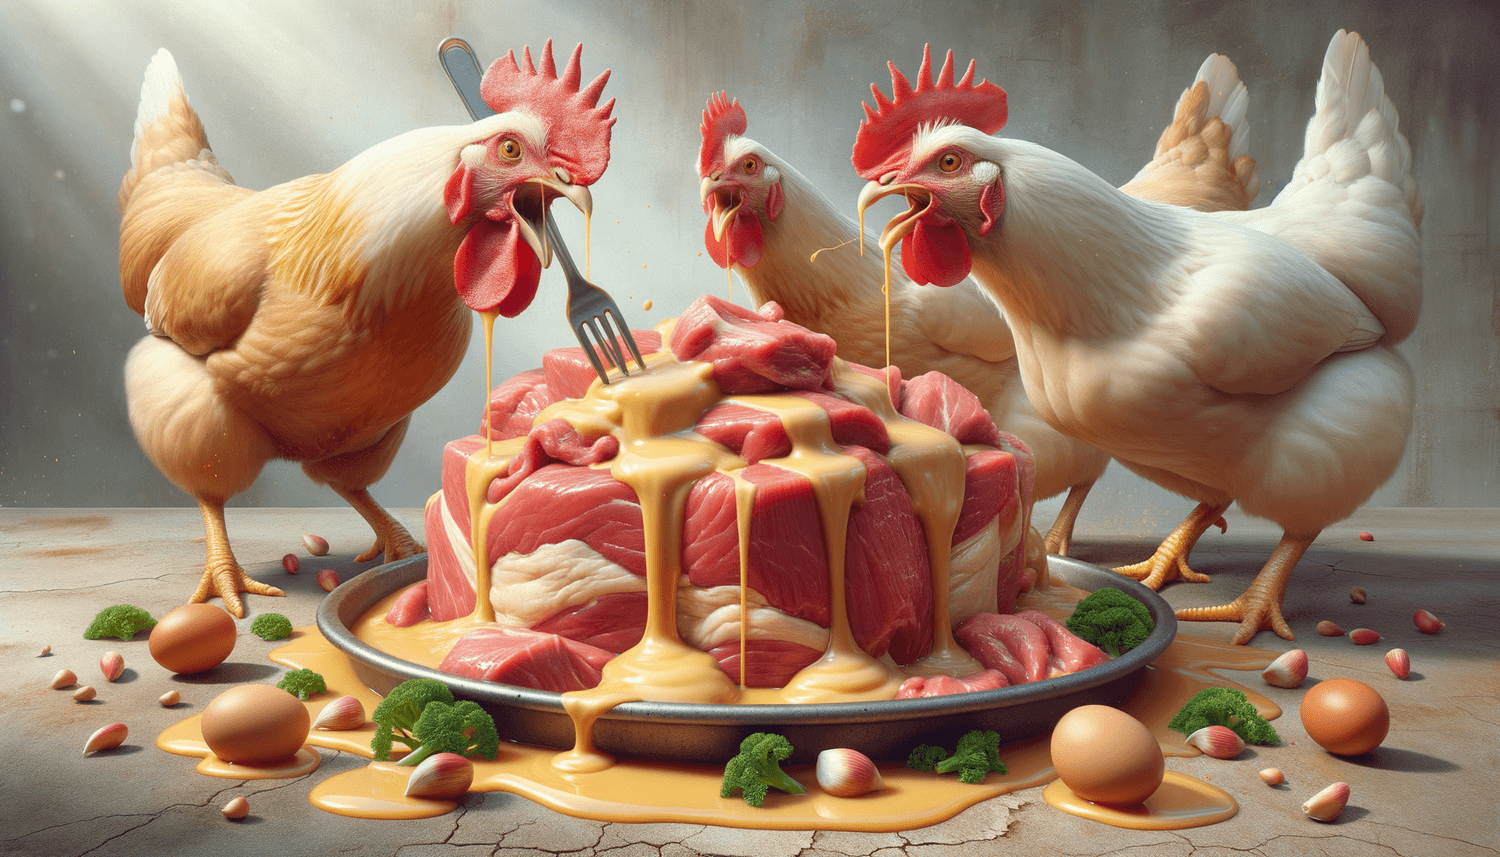 Can Chickens Eat Raw Beef Fat?